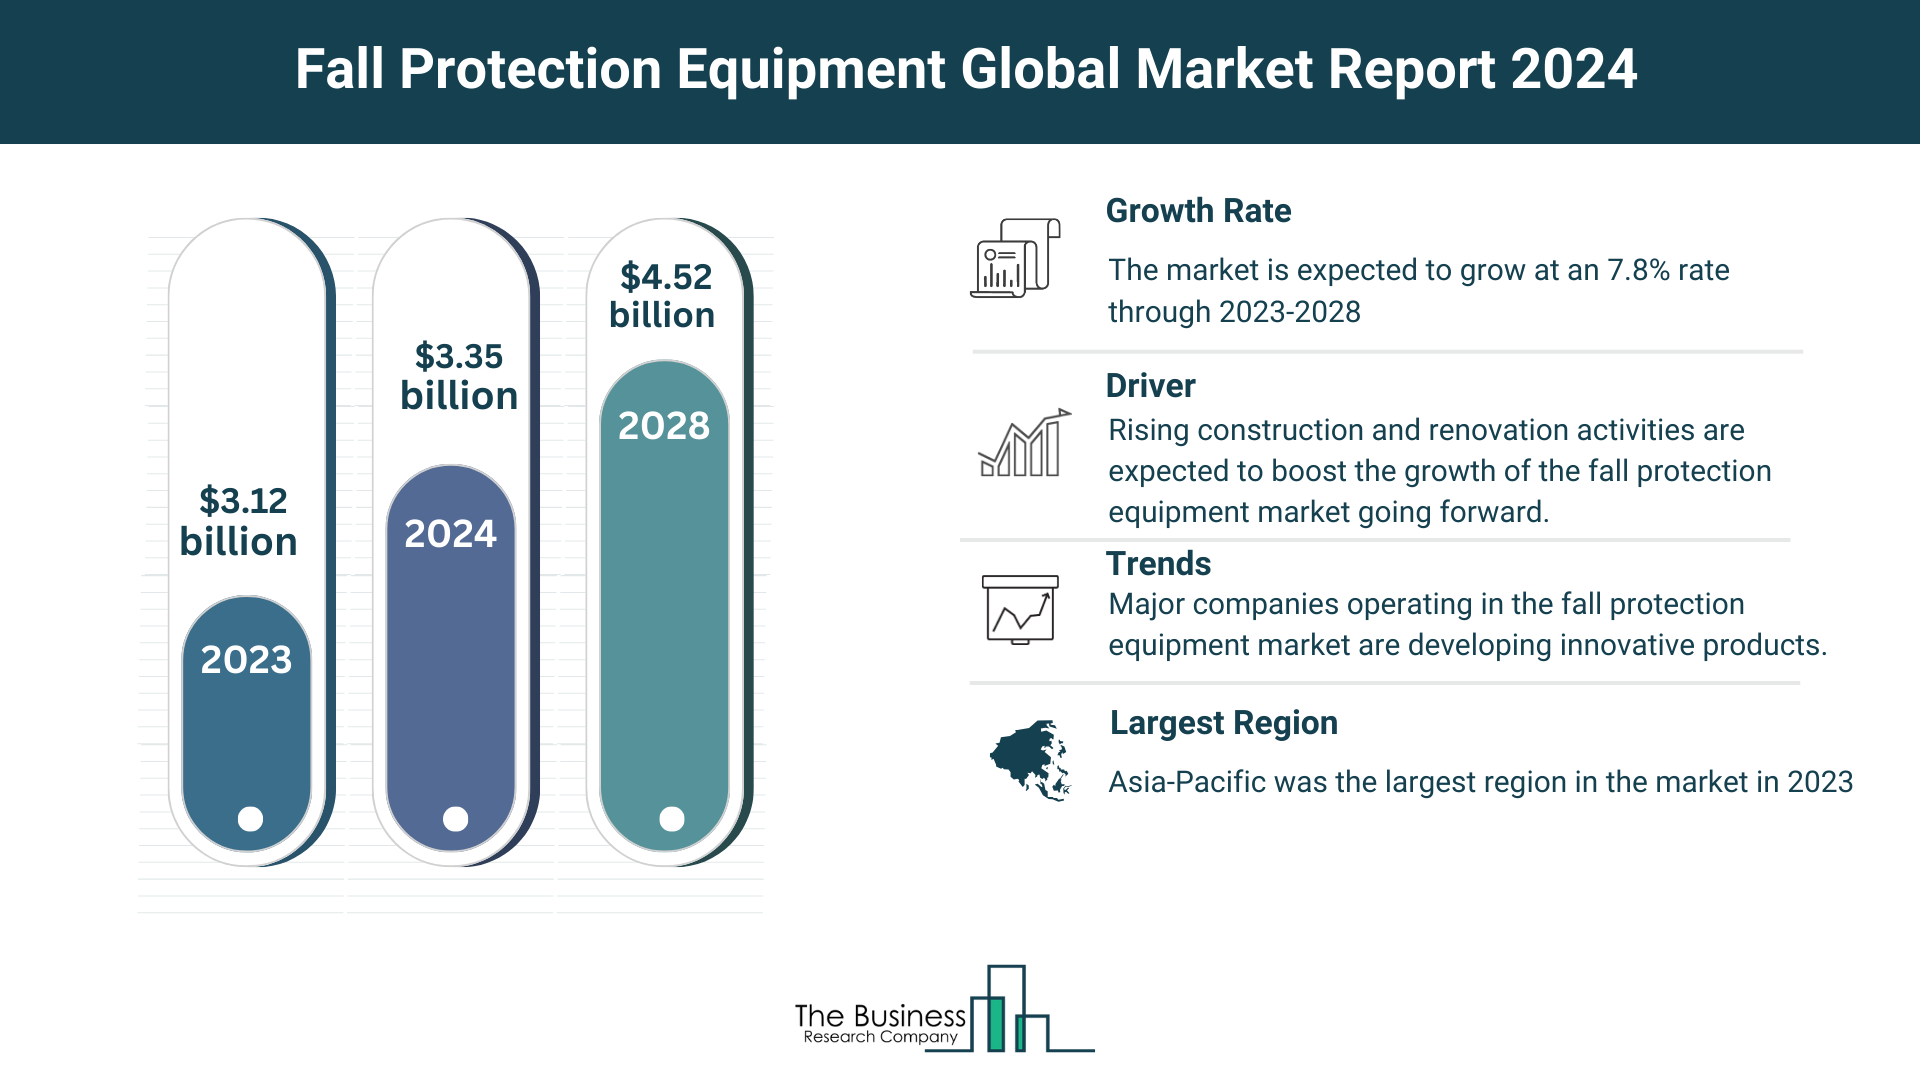 Global Fall Protection Equipment Market Analysis: Size, Drivers, Trends, Opportunities And Strategies